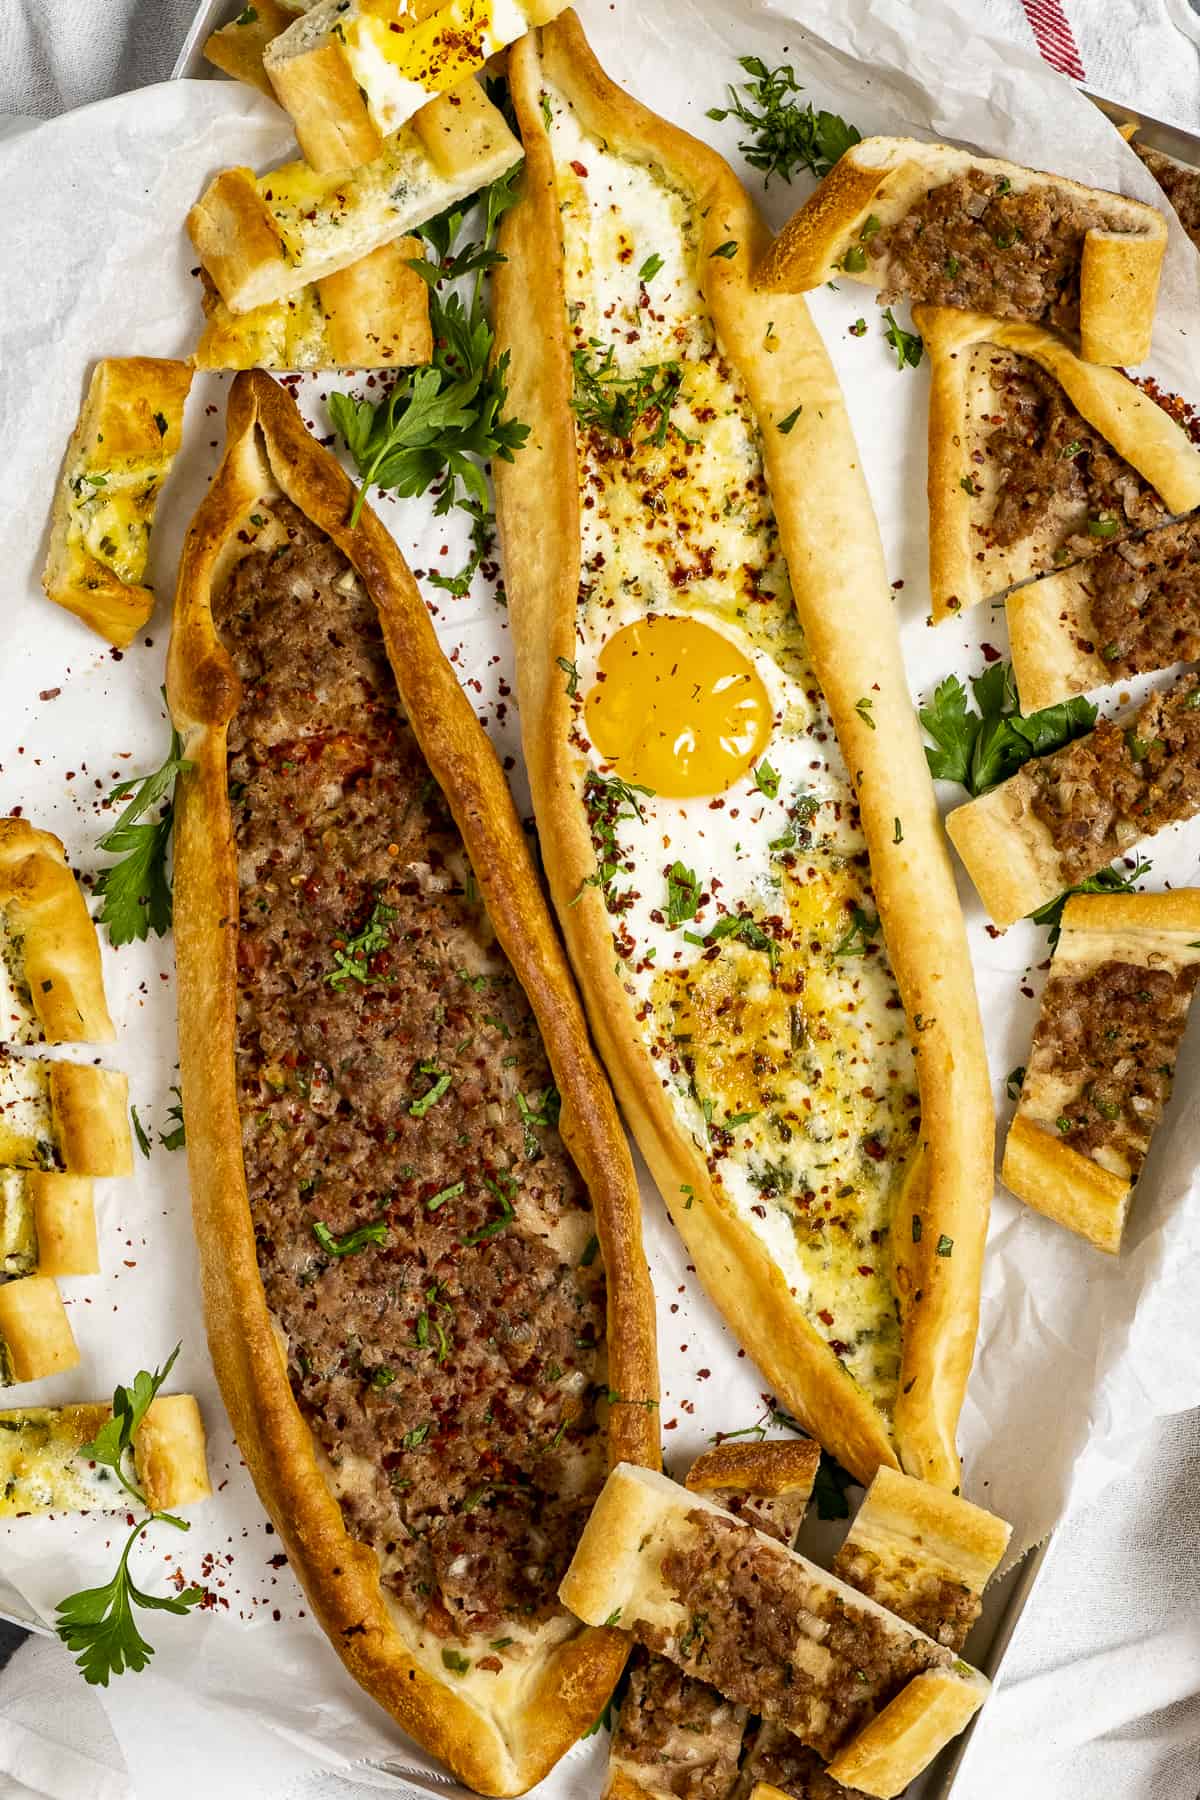 Two whole Turkish pide, one topped with an egg and slices of pide around them.